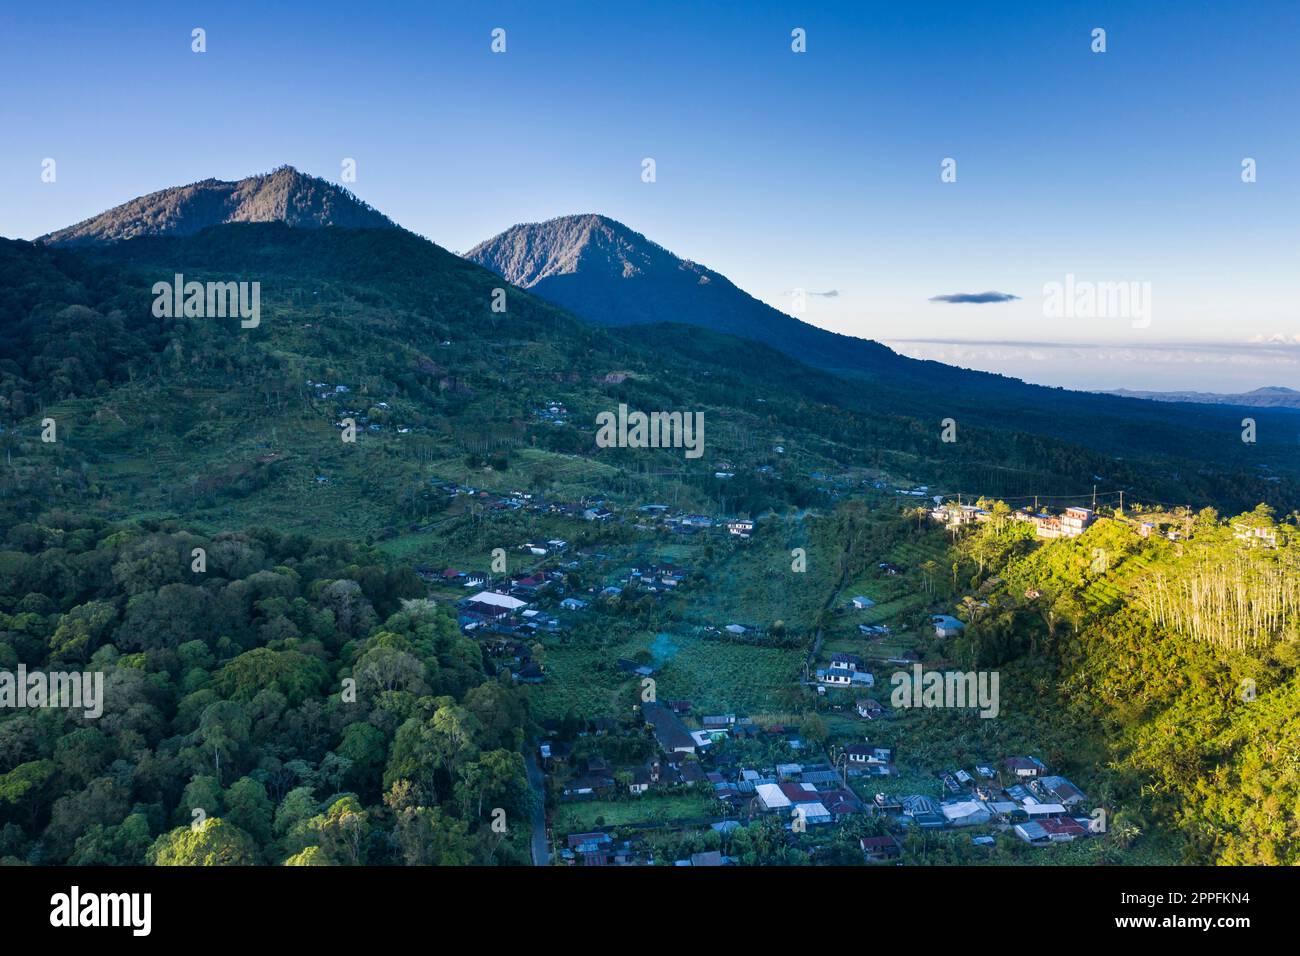 Drone view of the volcanic mountain of Munduk in Bali Indonesia Stock Photo